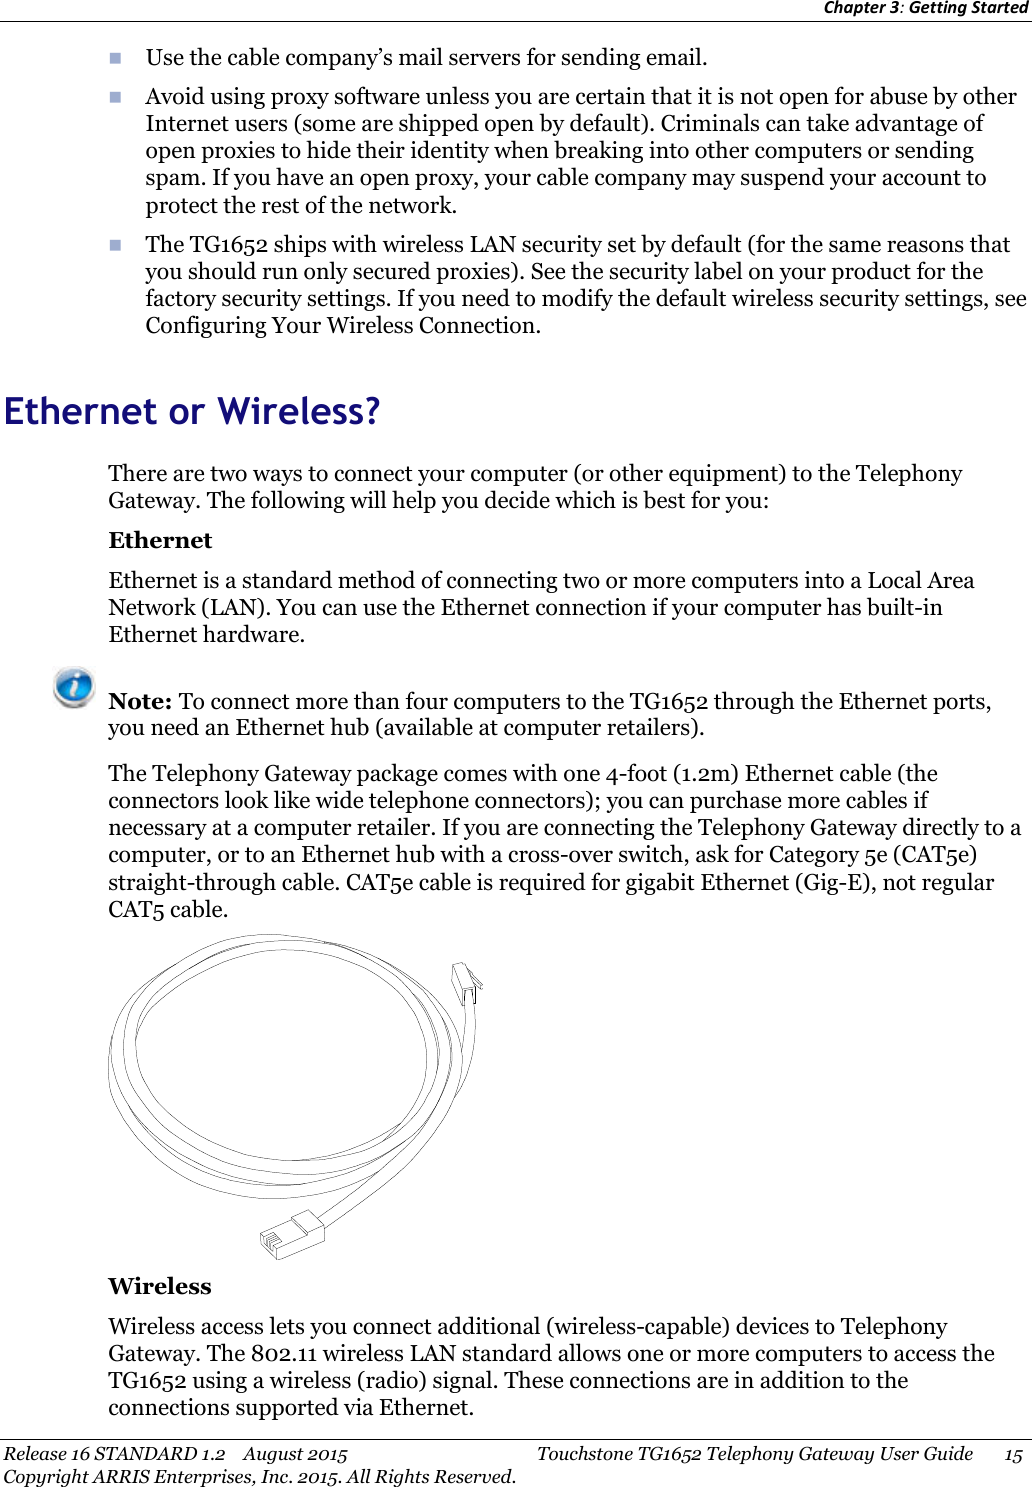 Chapter 3:Getting StartedRelease 16 STANDARD 1.2 August 2015 Touchstone TG1652 Telephony Gateway User Guide 15Copyright ARRIS Enterprises, Inc. 2015. All Rights Reserved.Use the cable company’s mail servers for sending email.Avoid using proxy software unless you are certain that it is not open for abuse by otherInternet users (some are shipped open by default). Criminals can take advantage ofopen proxies to hide their identity when breaking into other computers or sendingspam. If you have an open proxy, your cable company may suspend your account toprotect the rest of the network.The TG1652 ships with wireless LAN security set by default (for the same reasons thatyou should run only secured proxies). See the security label on your product for thefactory security settings. If you need to modify the default wireless security settings, seeConfiguring Your Wireless Connection.Ethernet or Wireless?There are two ways to connect your computer (or other equipment) to the TelephonyGateway. The following will help you decide which is best for you:EthernetEthernet is a standard method of connecting two or more computers into a Local AreaNetwork (LAN). You can use the Ethernet connection if your computer has built-inEthernet hardware.Note: To connect more than four computers to the TG1652 through the Ethernet ports,you need an Ethernet hub (available at computer retailers).The Telephony Gateway package comes with one 4-foot (1.2m) Ethernet cable (theconnectors look like wide telephone connectors); you can purchase more cables ifnecessary at a computer retailer. If you are connecting the Telephony Gateway directly to acomputer, or to an Ethernet hub with a cross-over switch, ask for Category 5e (CAT5e)straight-through cable. CAT5e cable is required for gigabit Ethernet (Gig-E), not regularCAT5 cable.WirelessWireless access lets you connect additional (wireless-capable) devices to TelephonyGateway. The 802.11 wireless LAN standard allows one or more computers to access theTG1652 using a wireless (radio) signal. These connections are in addition to theconnections supported via Ethernet.